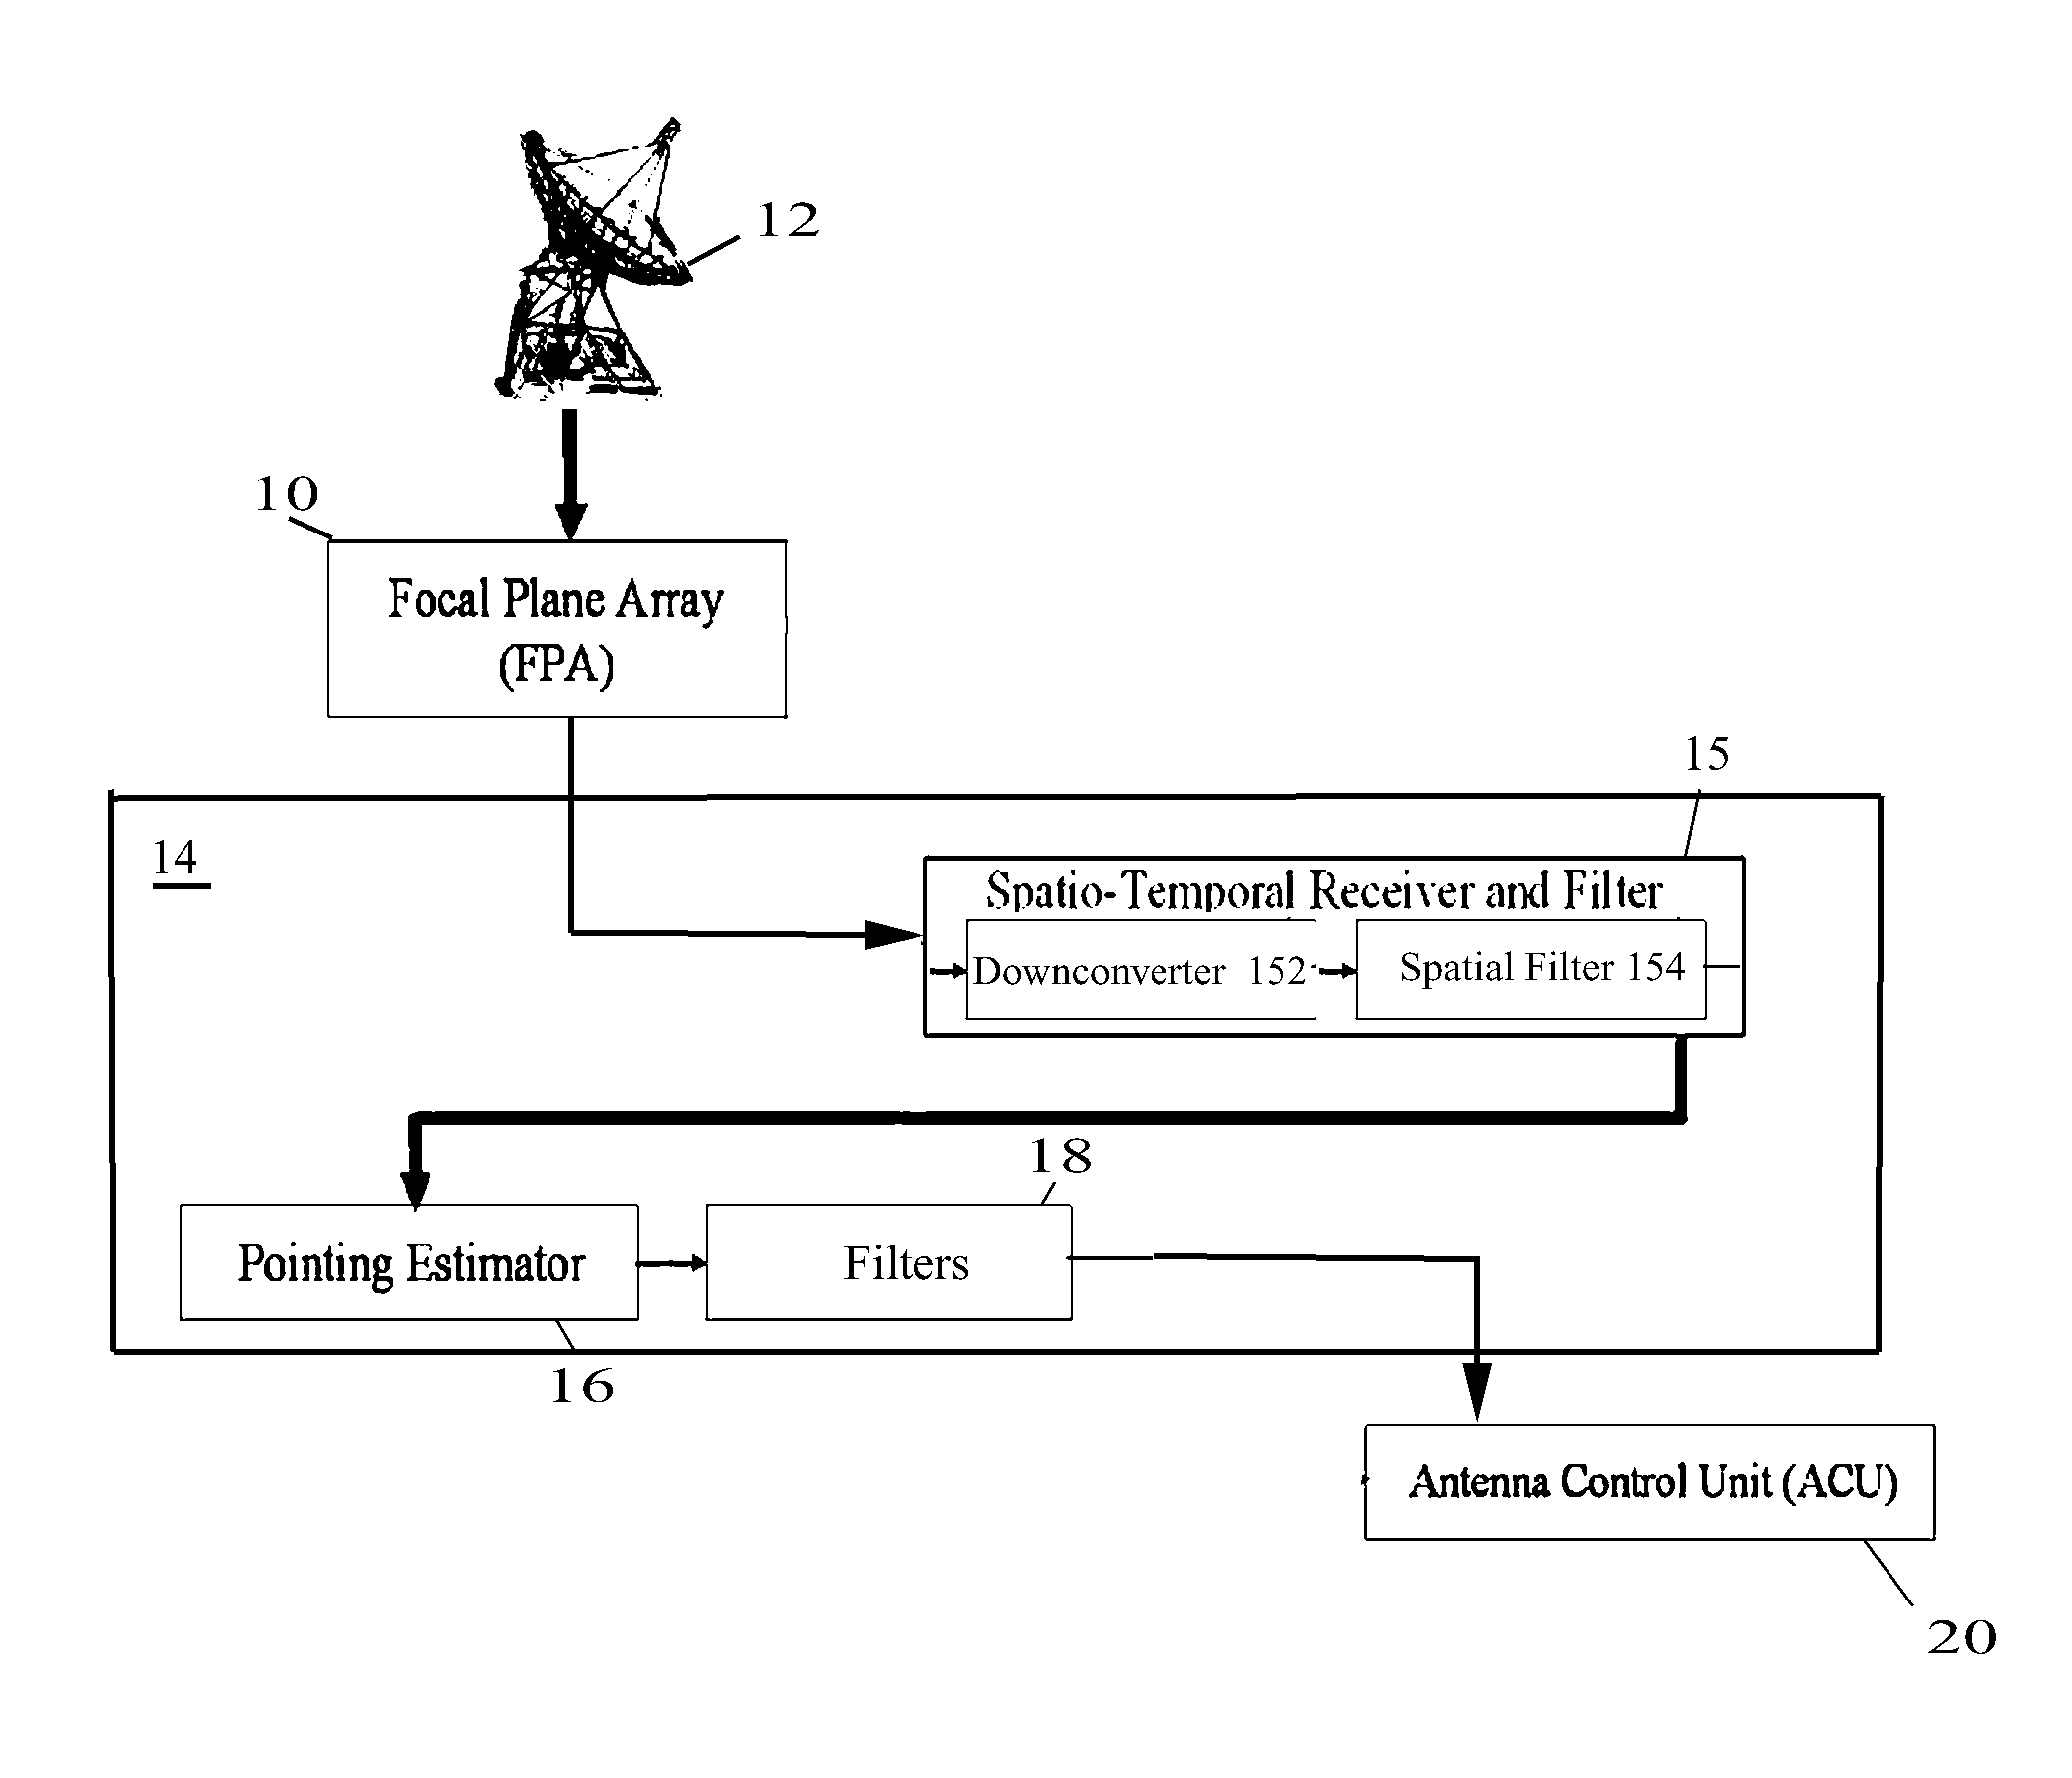 Enchanced interference cancellation and telemetry reception in multipath environments with a single parabolic dish antenna using a focal plane array